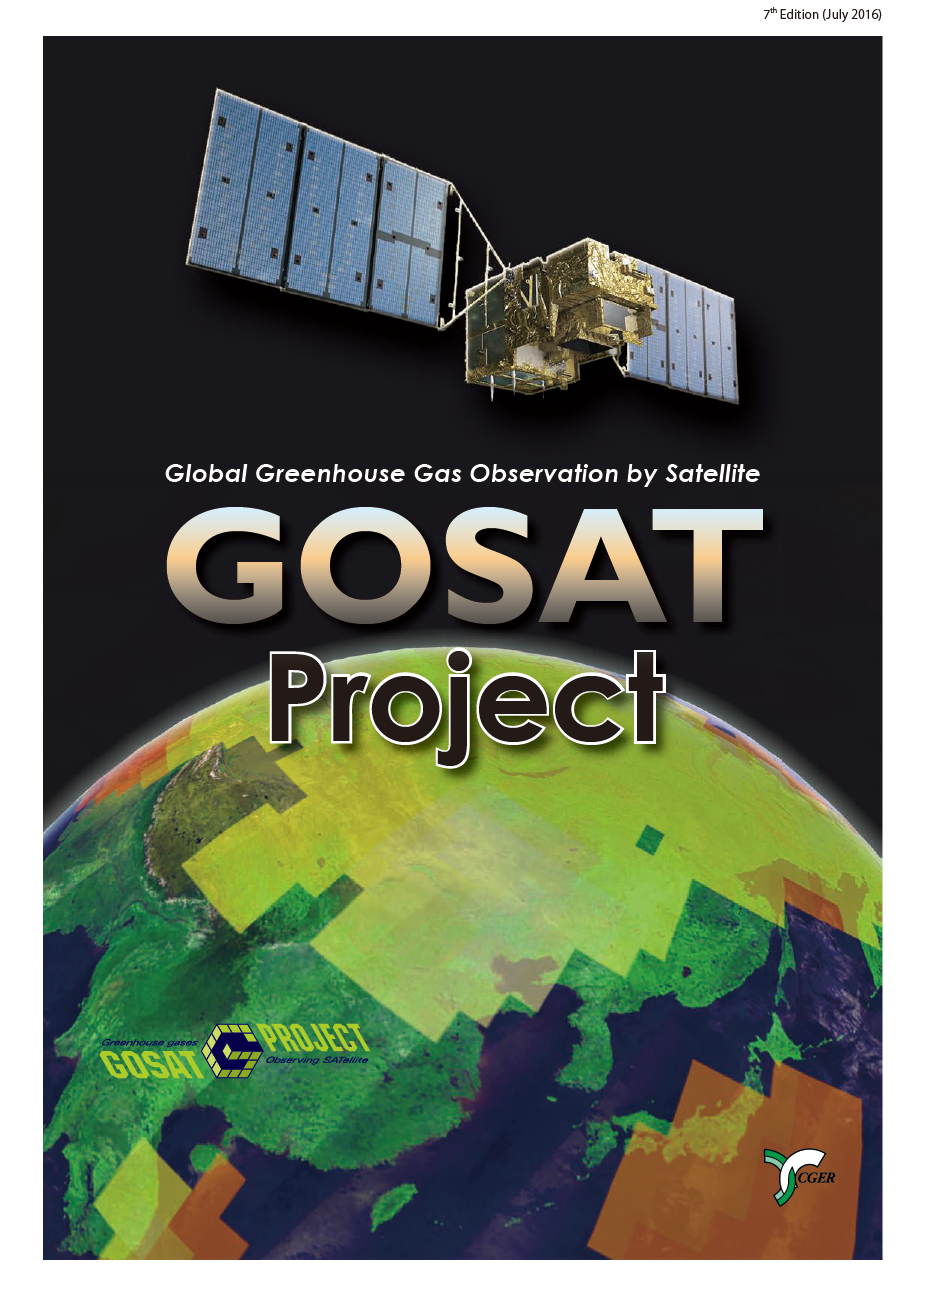 GOSAT Project pamphlets have been updated to the 7th edition